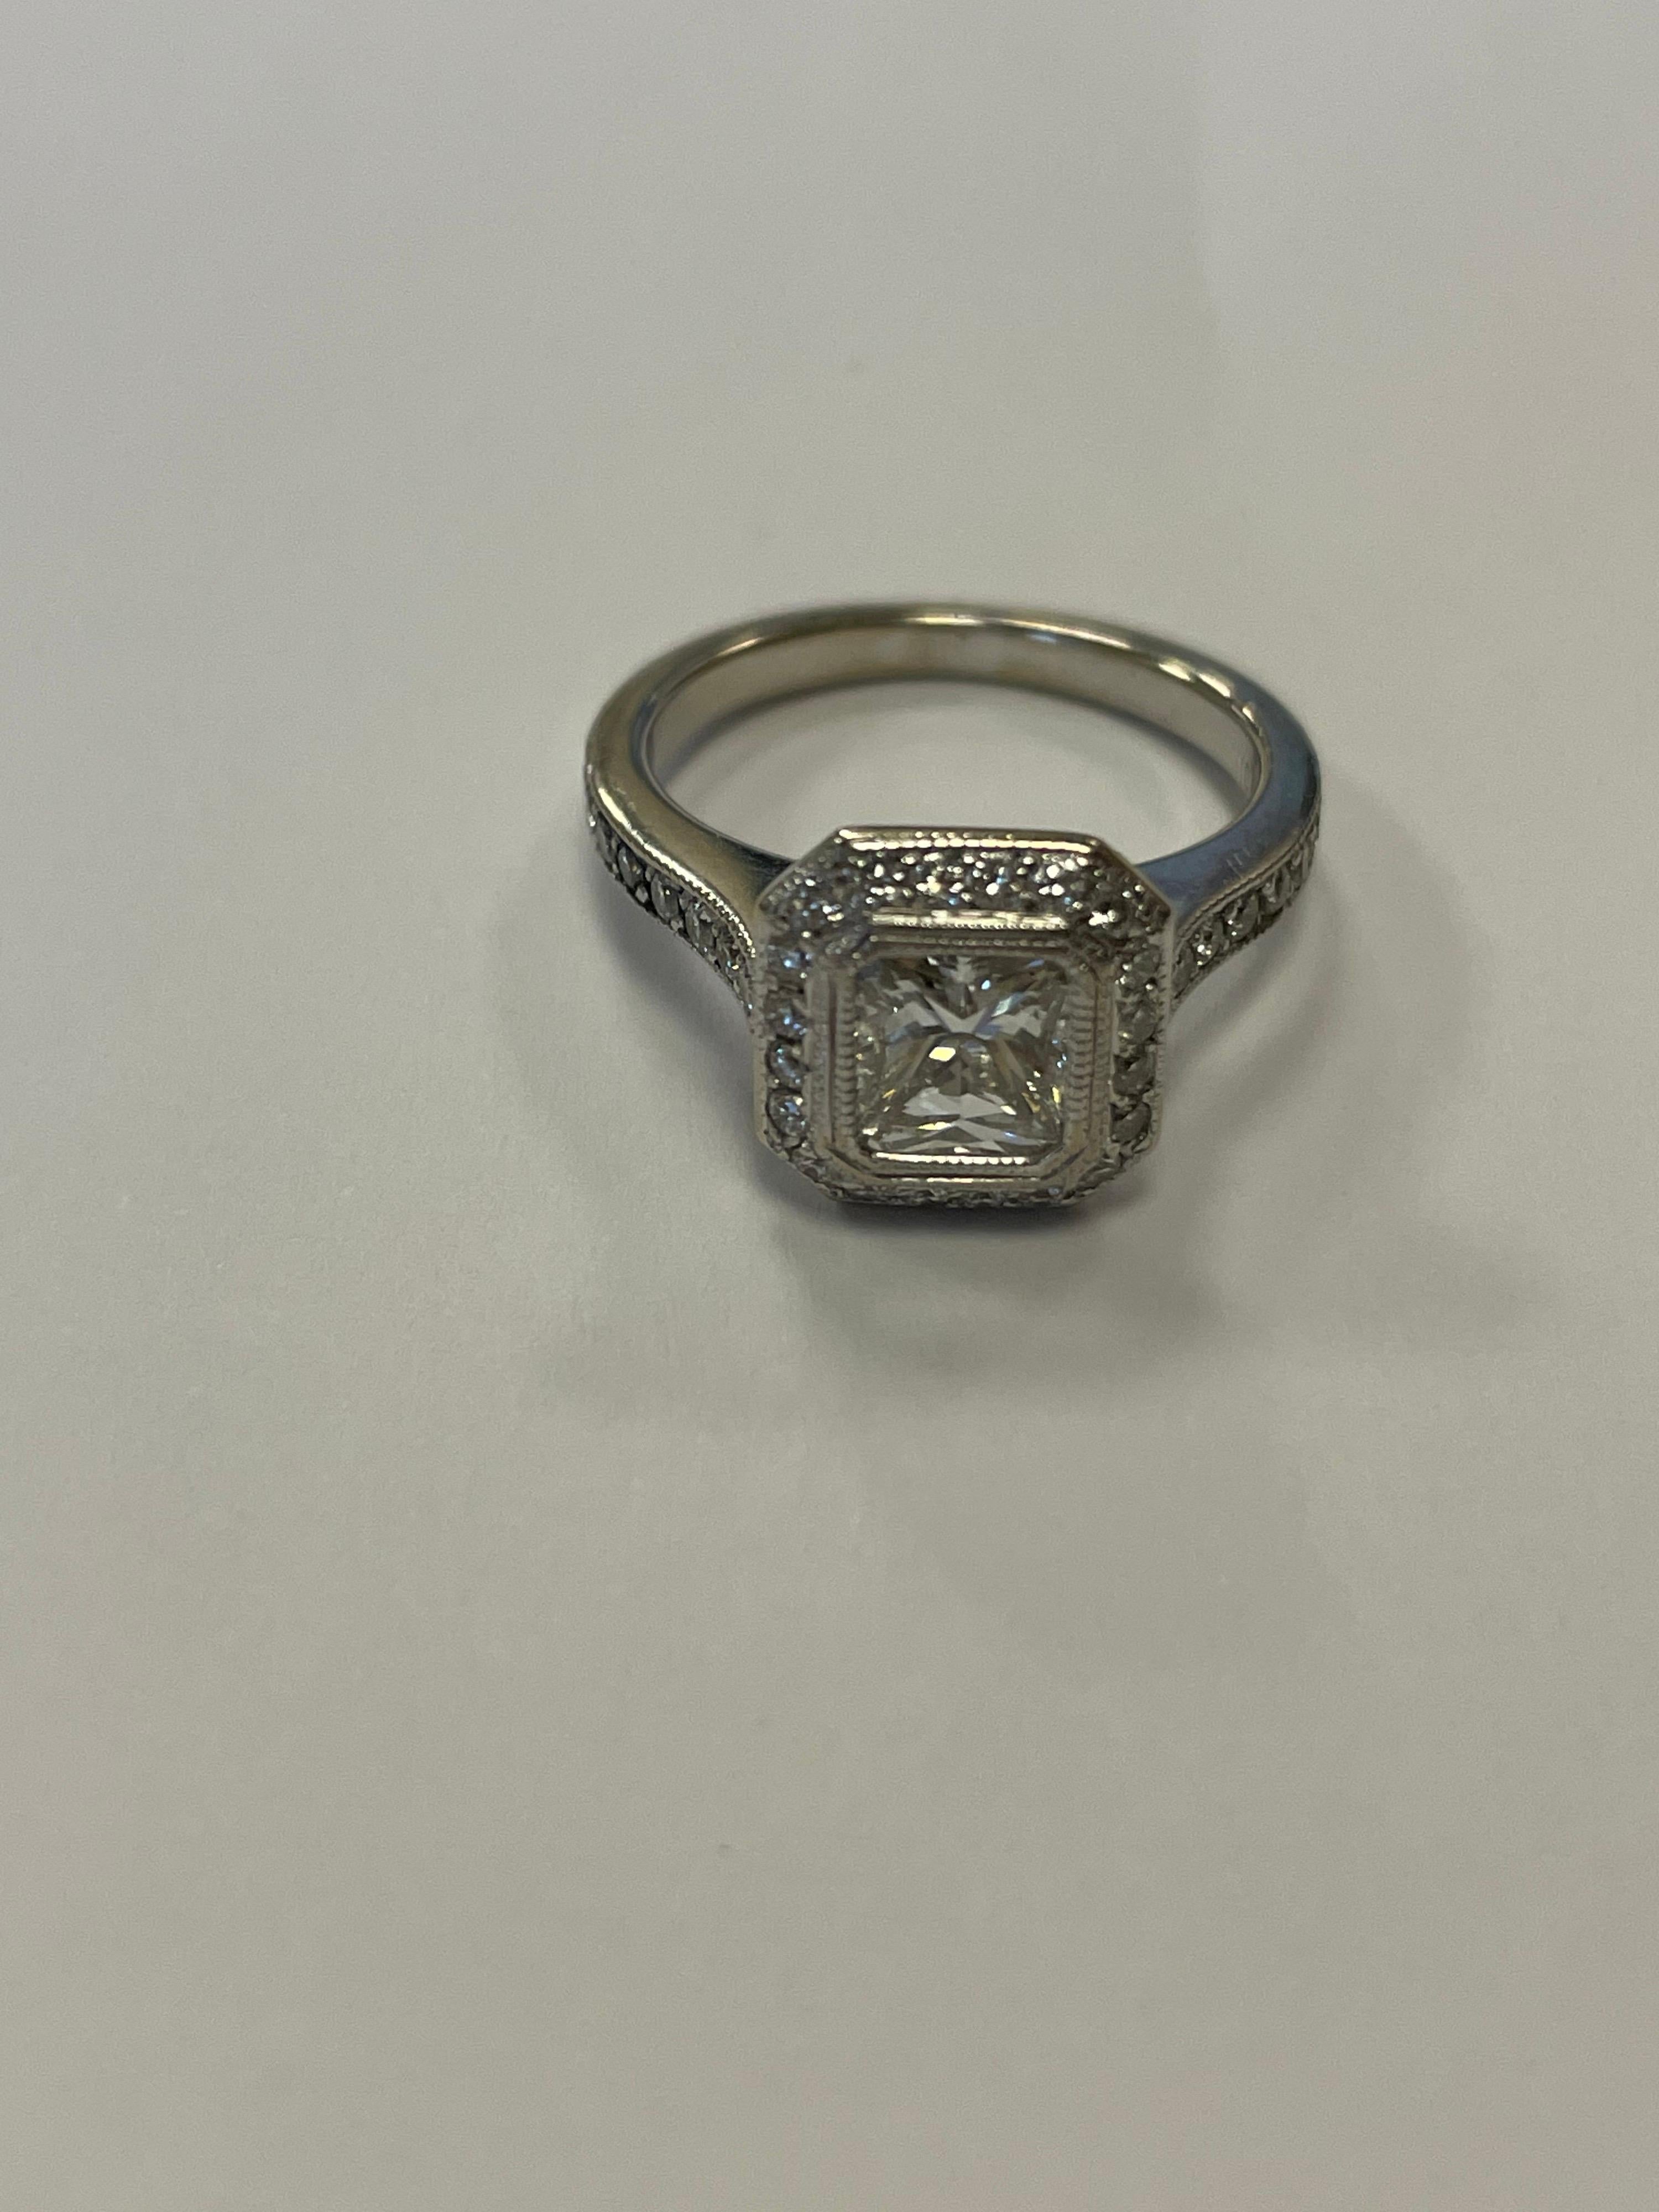 GIA certified Radiant cut diamond weighing .97cts, H color, SI1 clarity set in 18K white gold halo mounting with 40 full cut round diamonds weighing .46cts.
Finger size 6, may be sized
Last retail $8250